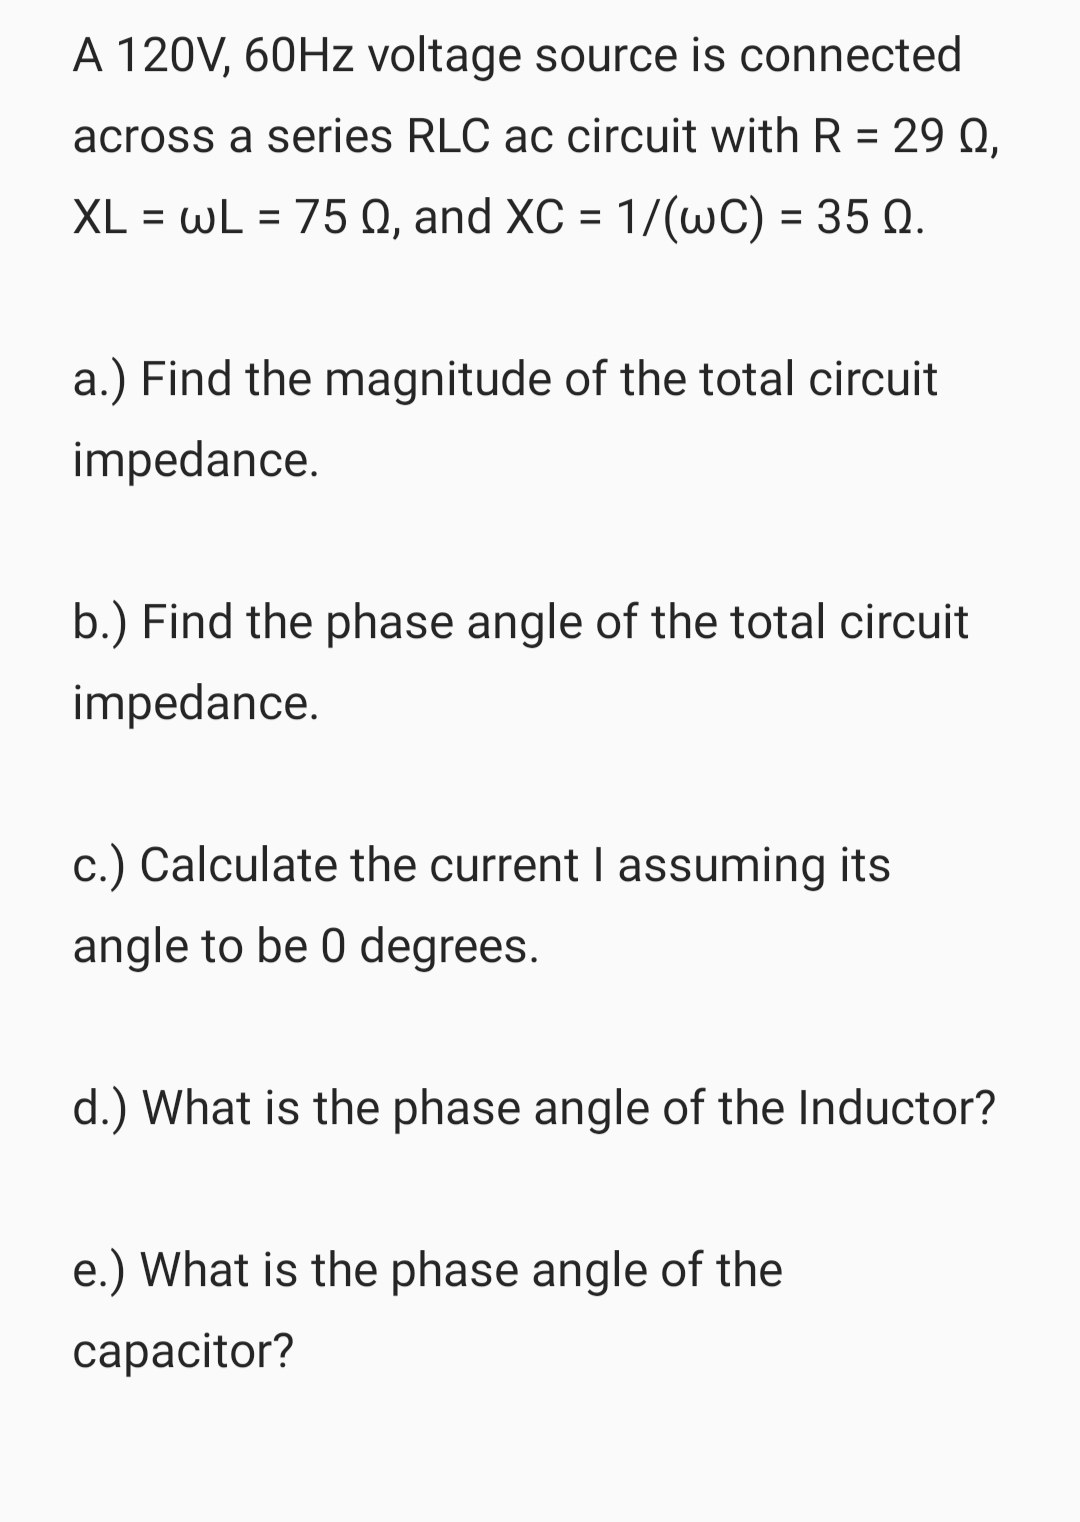 A 120V, 60Hz voltage source is connected
across a series RLC ac circuit with R = 29 Q,
XL = wL = 75 0, and XC = 1/(wC) = 35 Q.
a.) Find the magnitude of the total circuit
impedance.
b.) Find the phase angle of the total circuit
impedance.
c.) Calculate the current I assuming its
angle to be 0 degrees.
d.) What is the phase angle of the Inductor?
e.) What is the phase angle of the
capacitor?